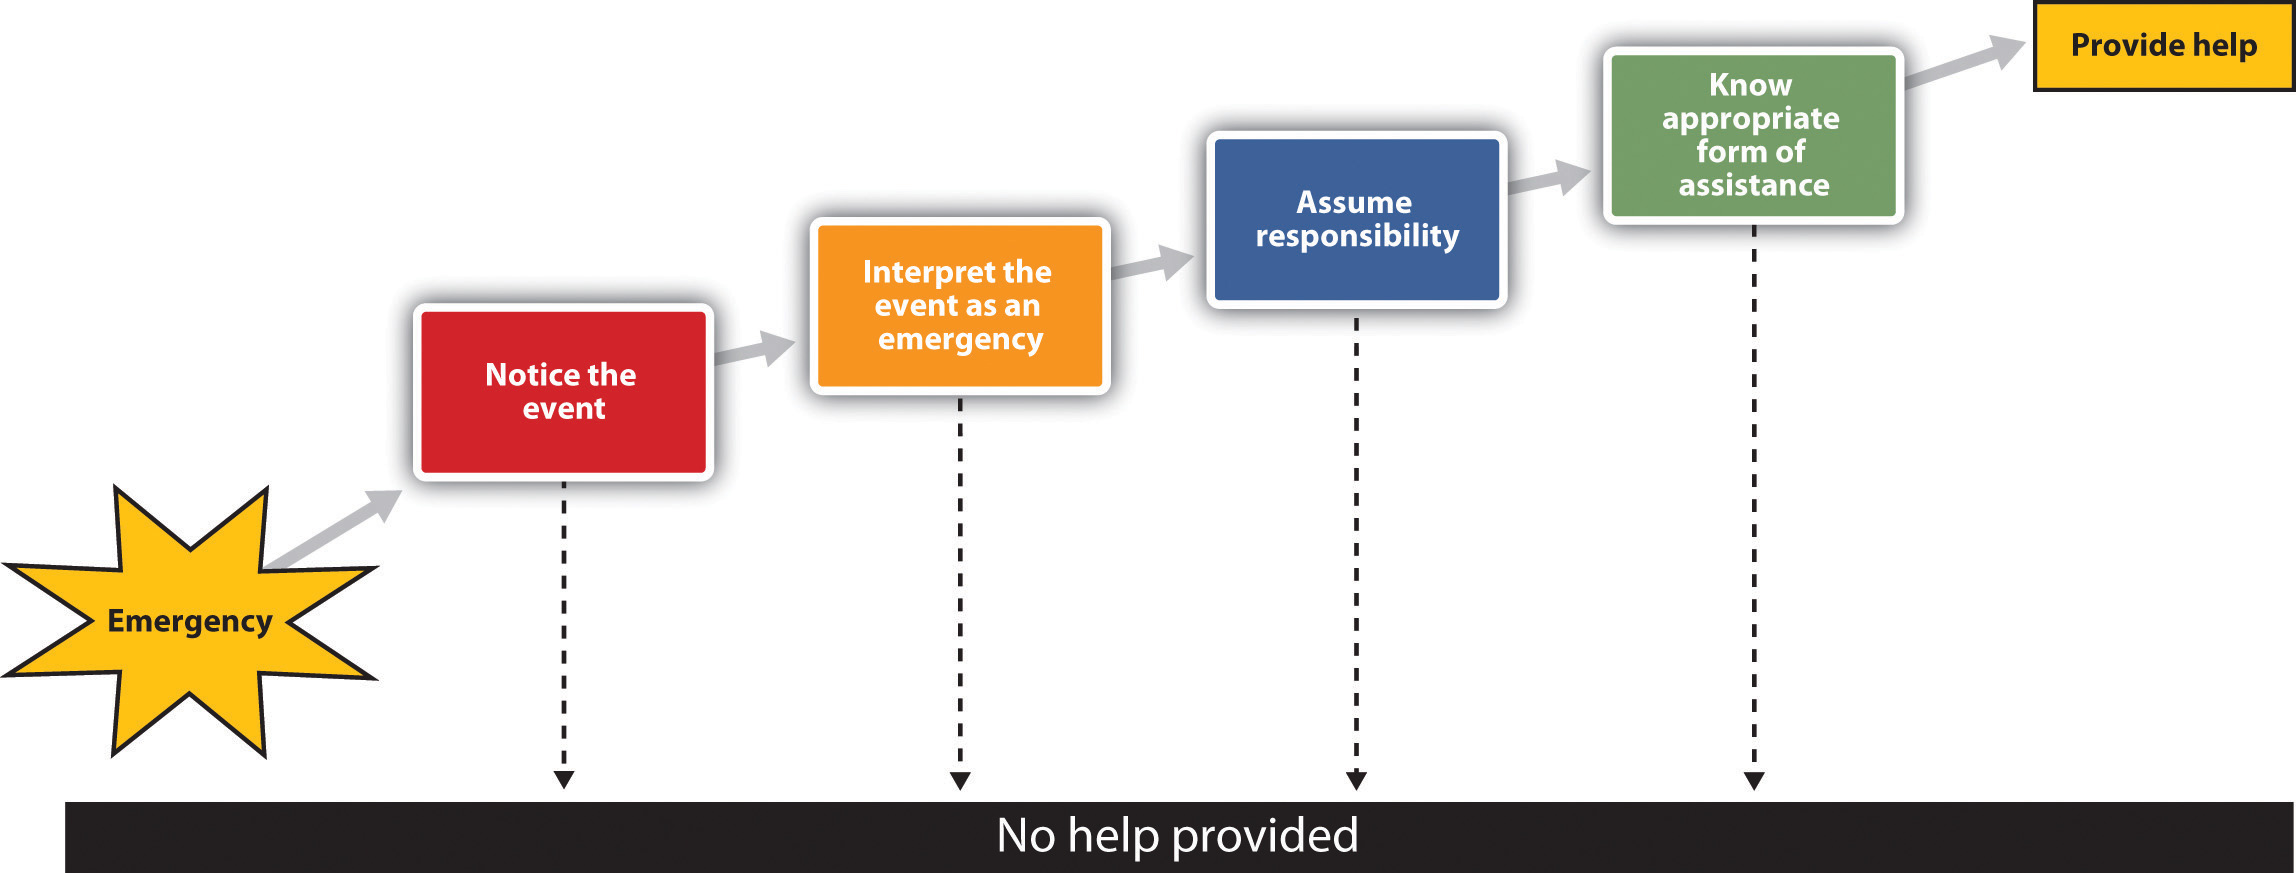 This chart illustrates the steps occuring between an emergency and providing help.